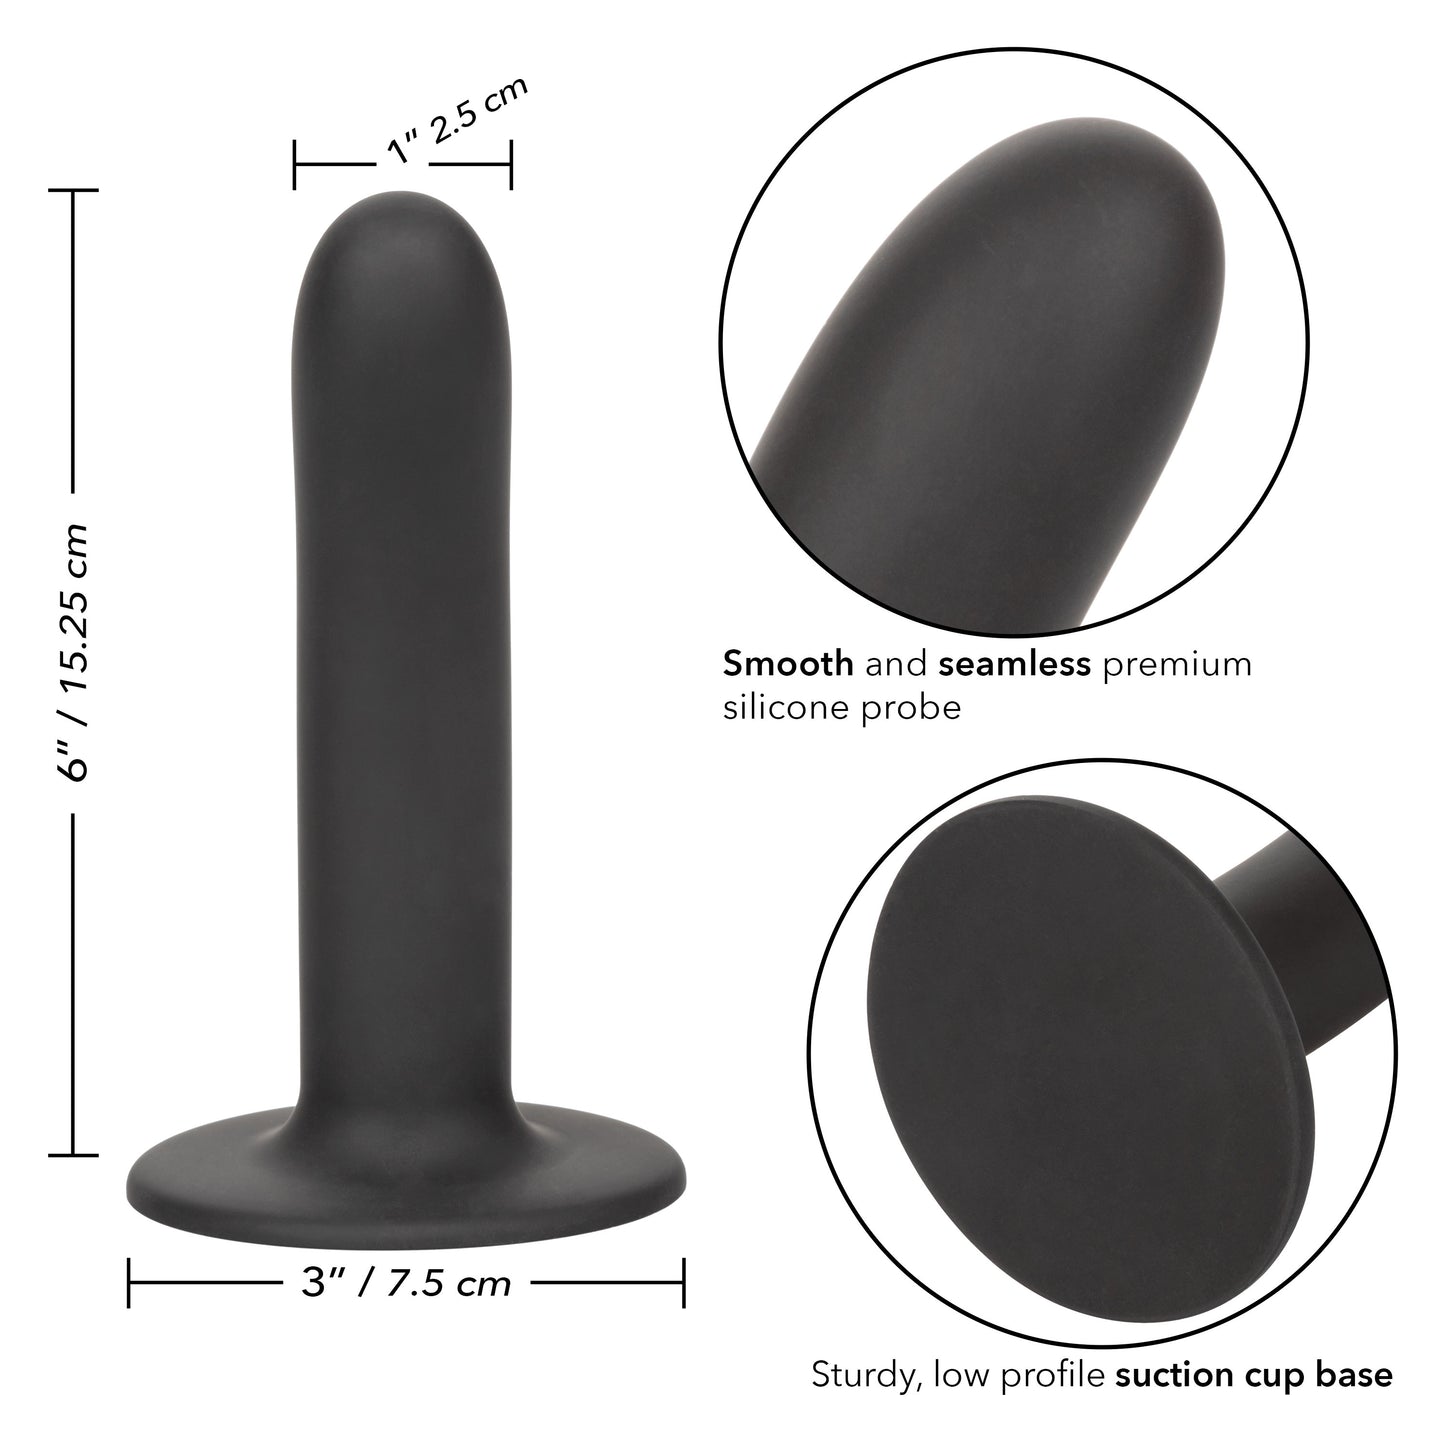 Boundless Smooth - 6 Inch - Black